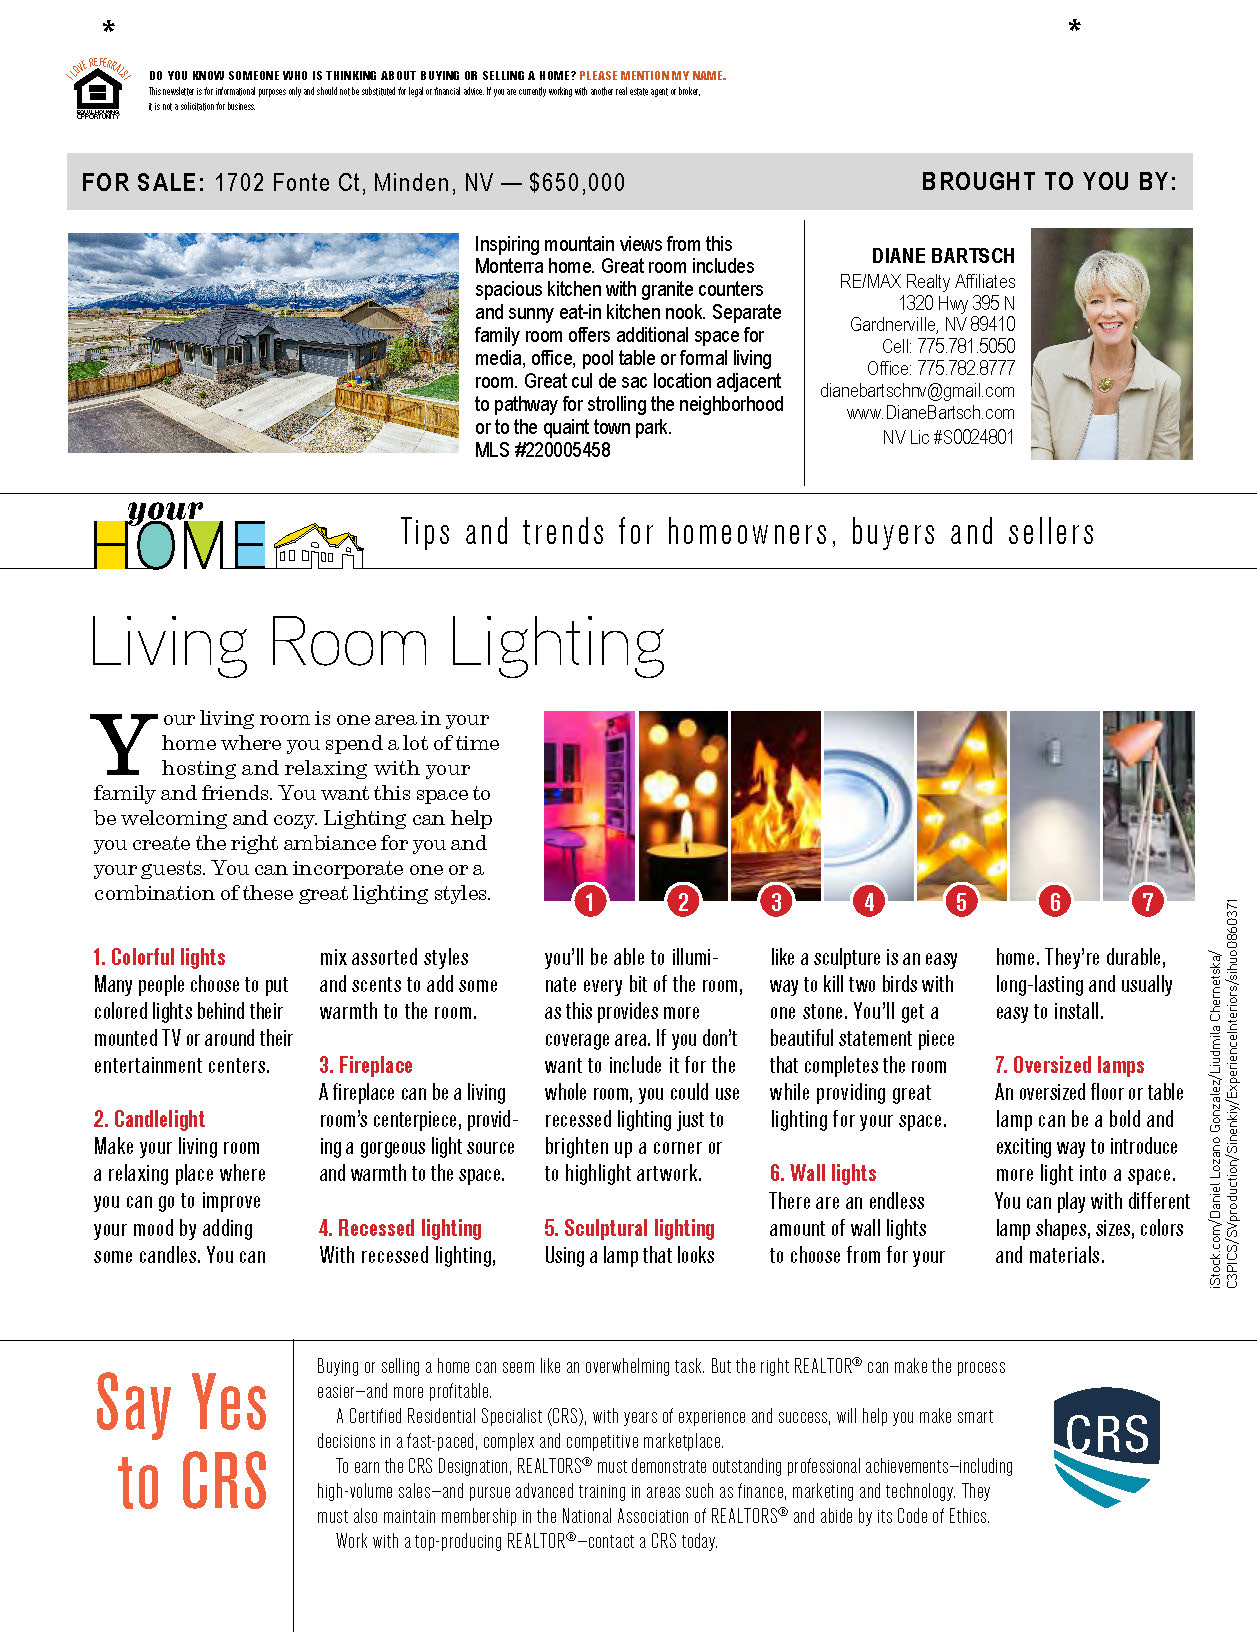 Your home newsletter page 2.